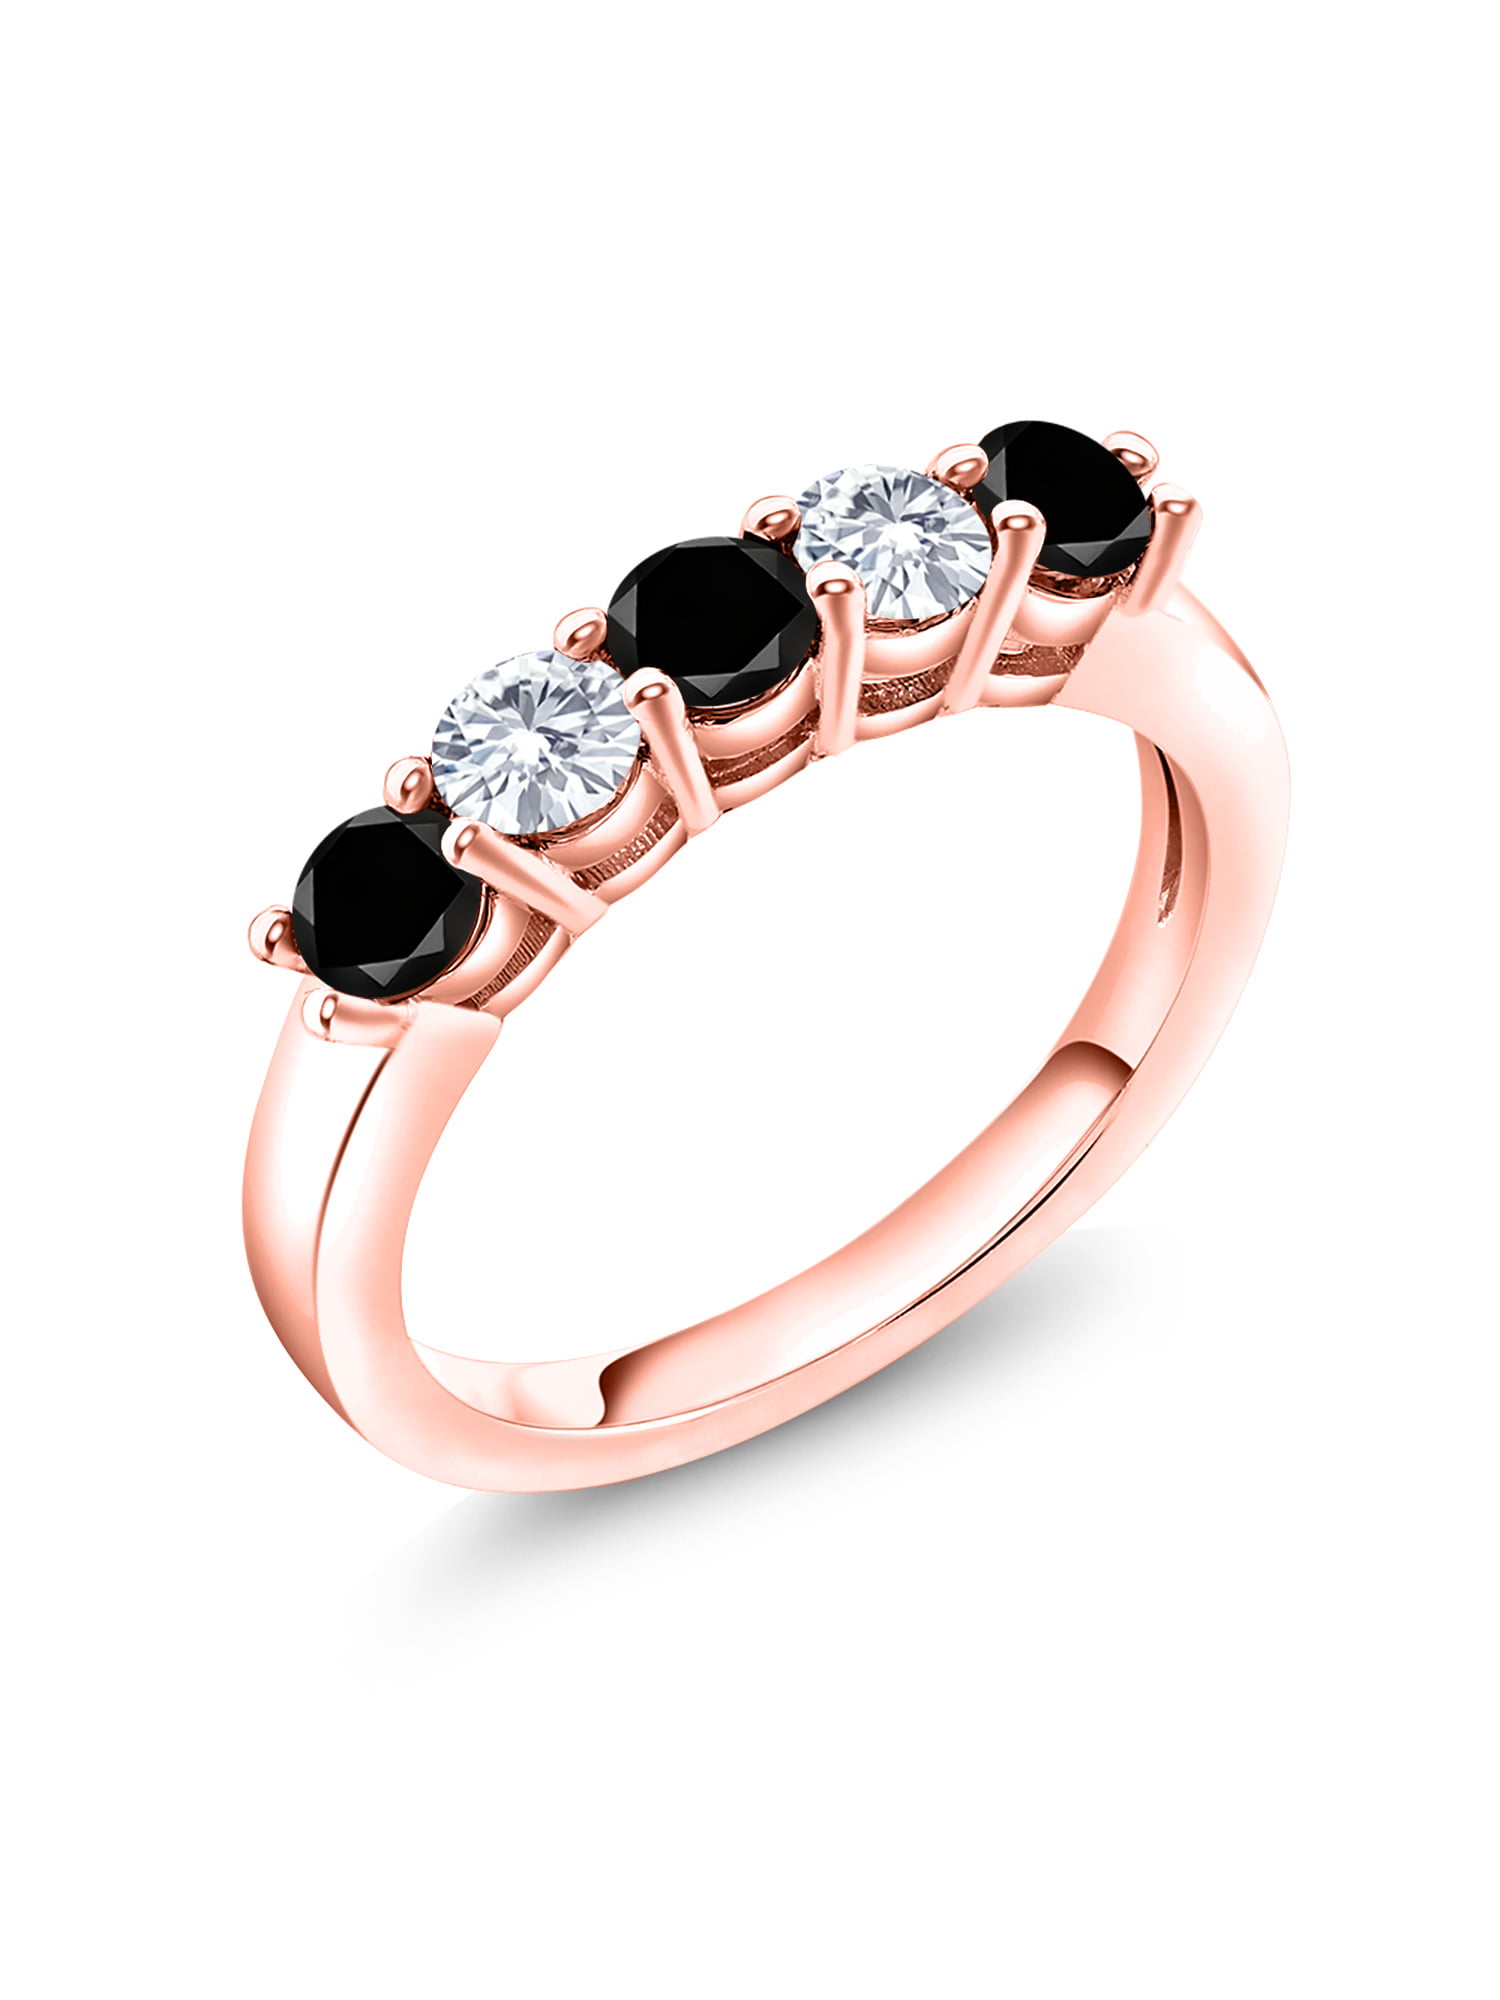 Gem Stone King 18K Rose Gold Plated Silver 3-Stone Wedding Jewelry Bridal Ring Round Pink Created Moissanite and Garnet Red 1.24cttw